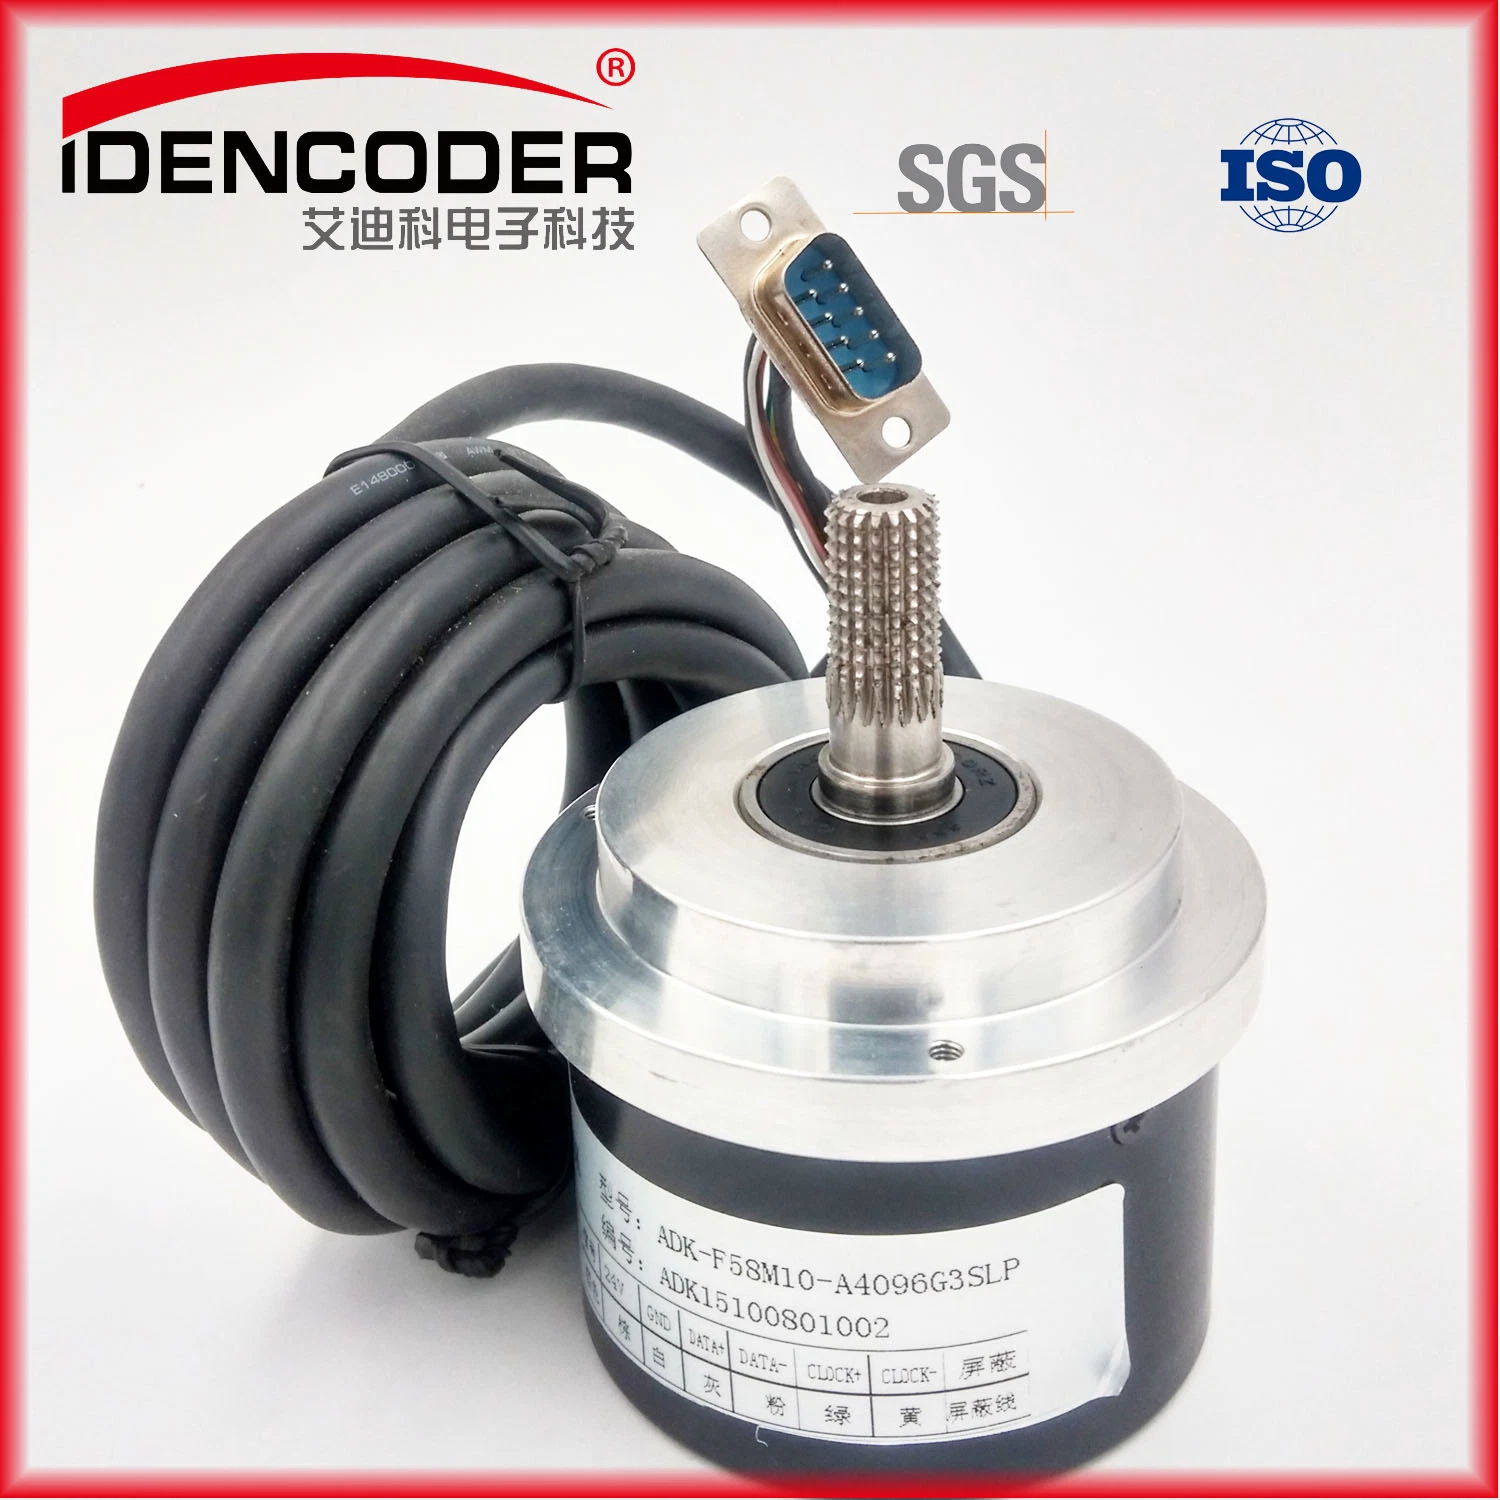 Incremental Universal Encoder Low Cost 1024PPR 2500PPR 4096PPR 5V 8-30VDC Variety Ouput Form Replace Omron E6b2